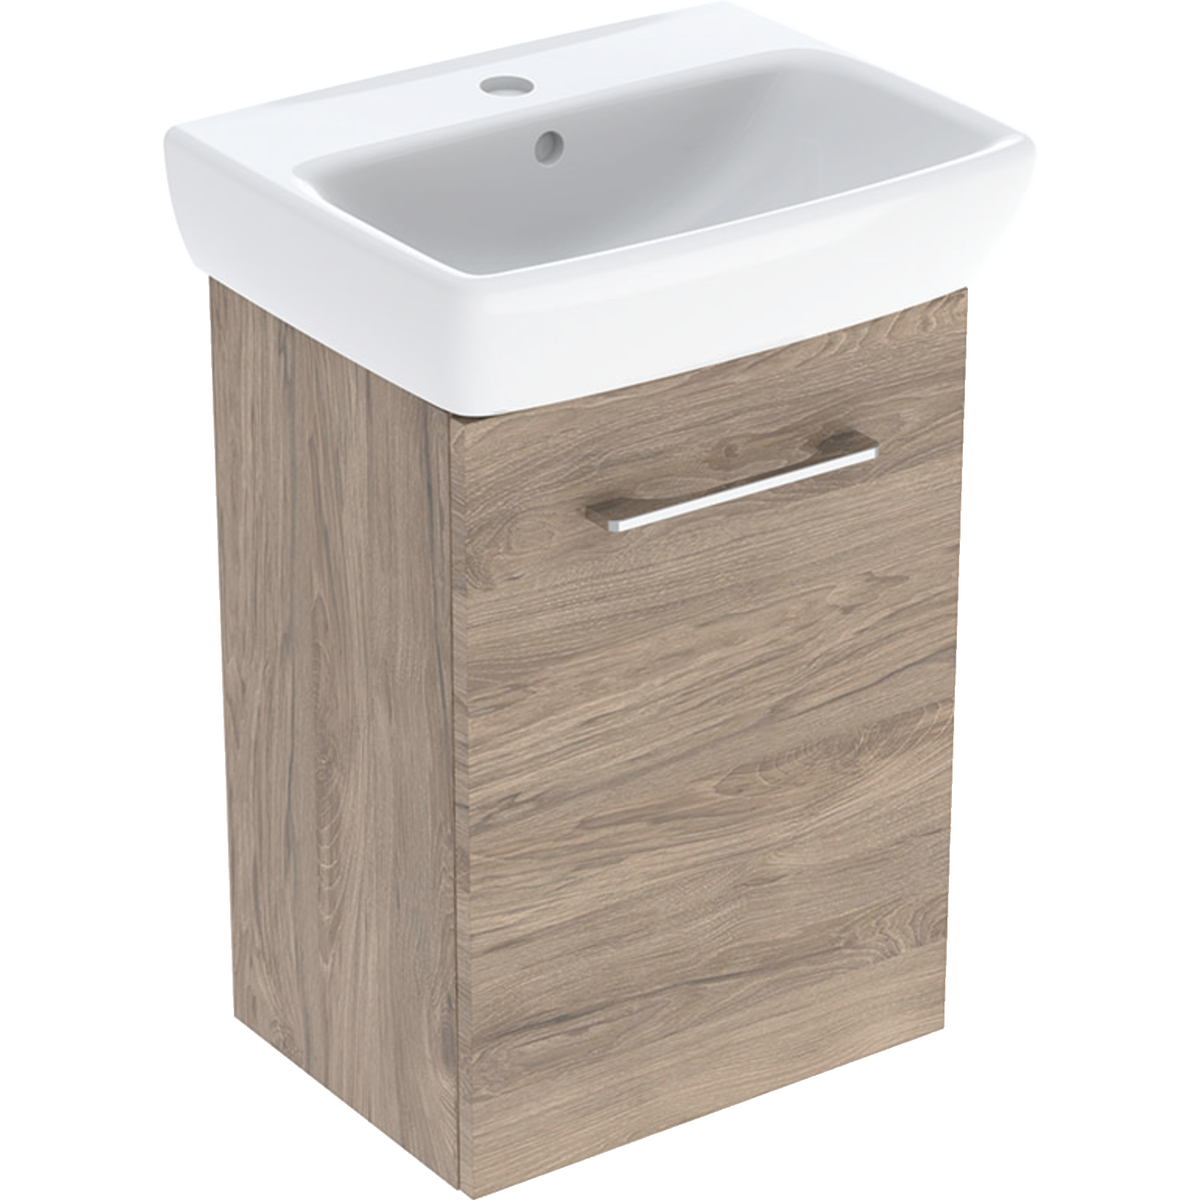 Selnova Square Basins With Cabinet, One Door 450mm - Hickory 